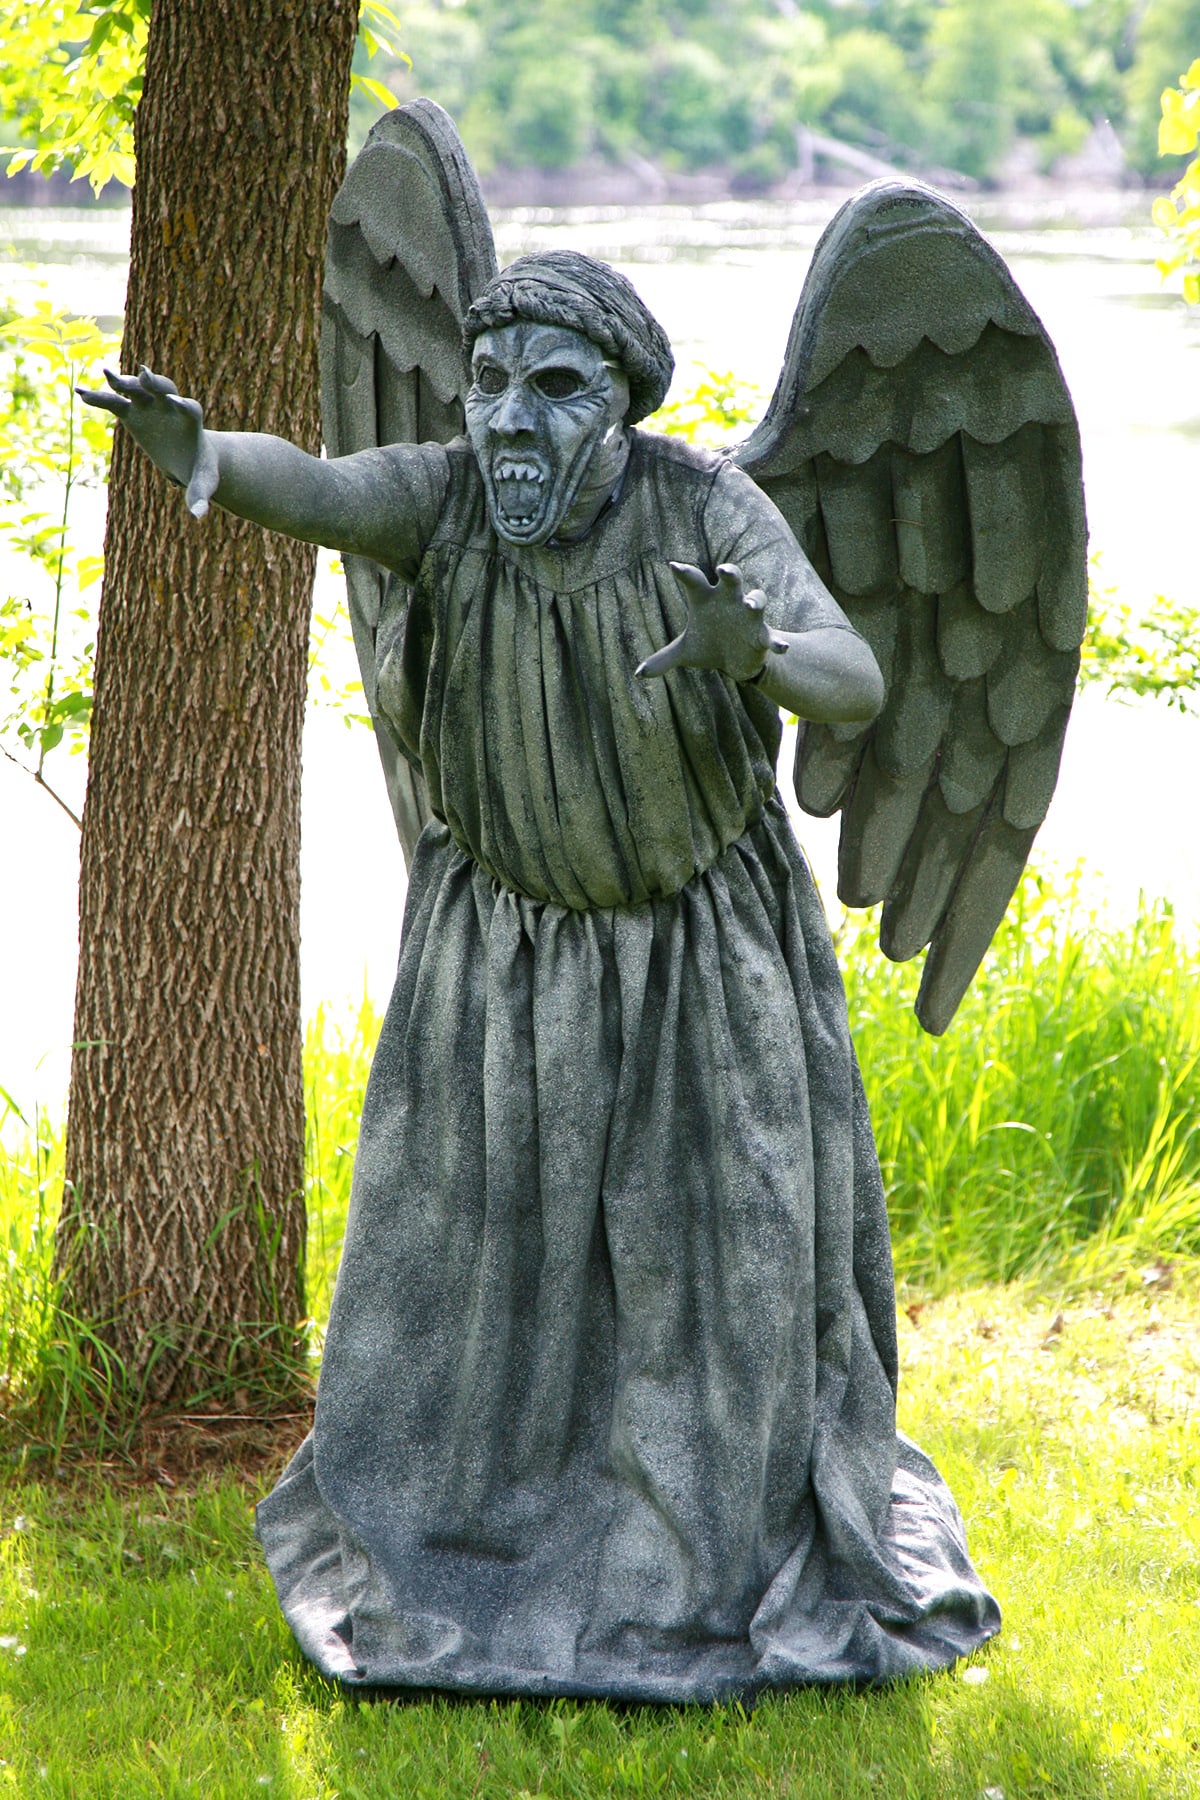 A person dressed as a weeping angel statue in a park.